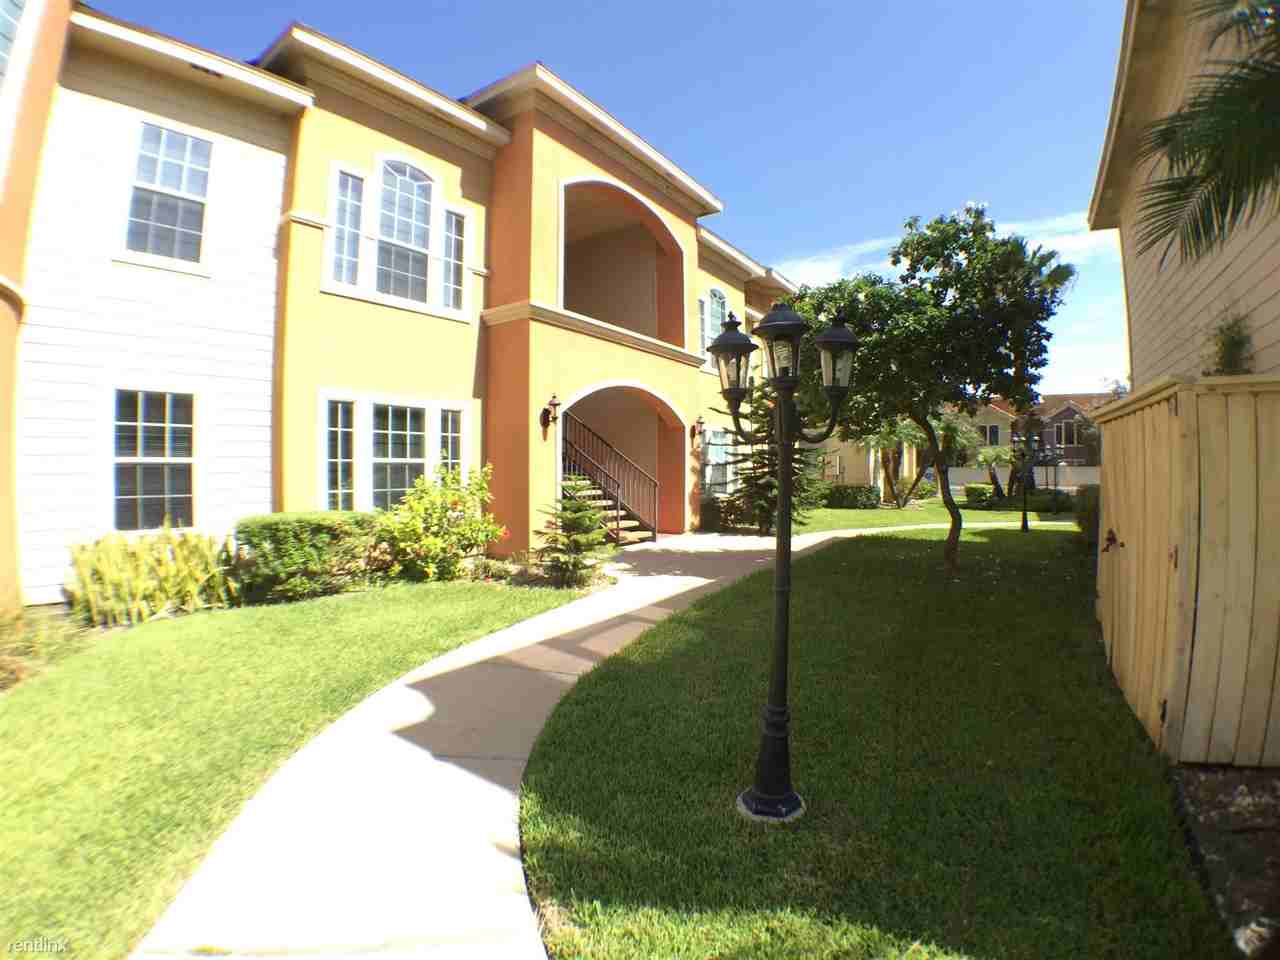  Apartments Near Mcallen for Large Space